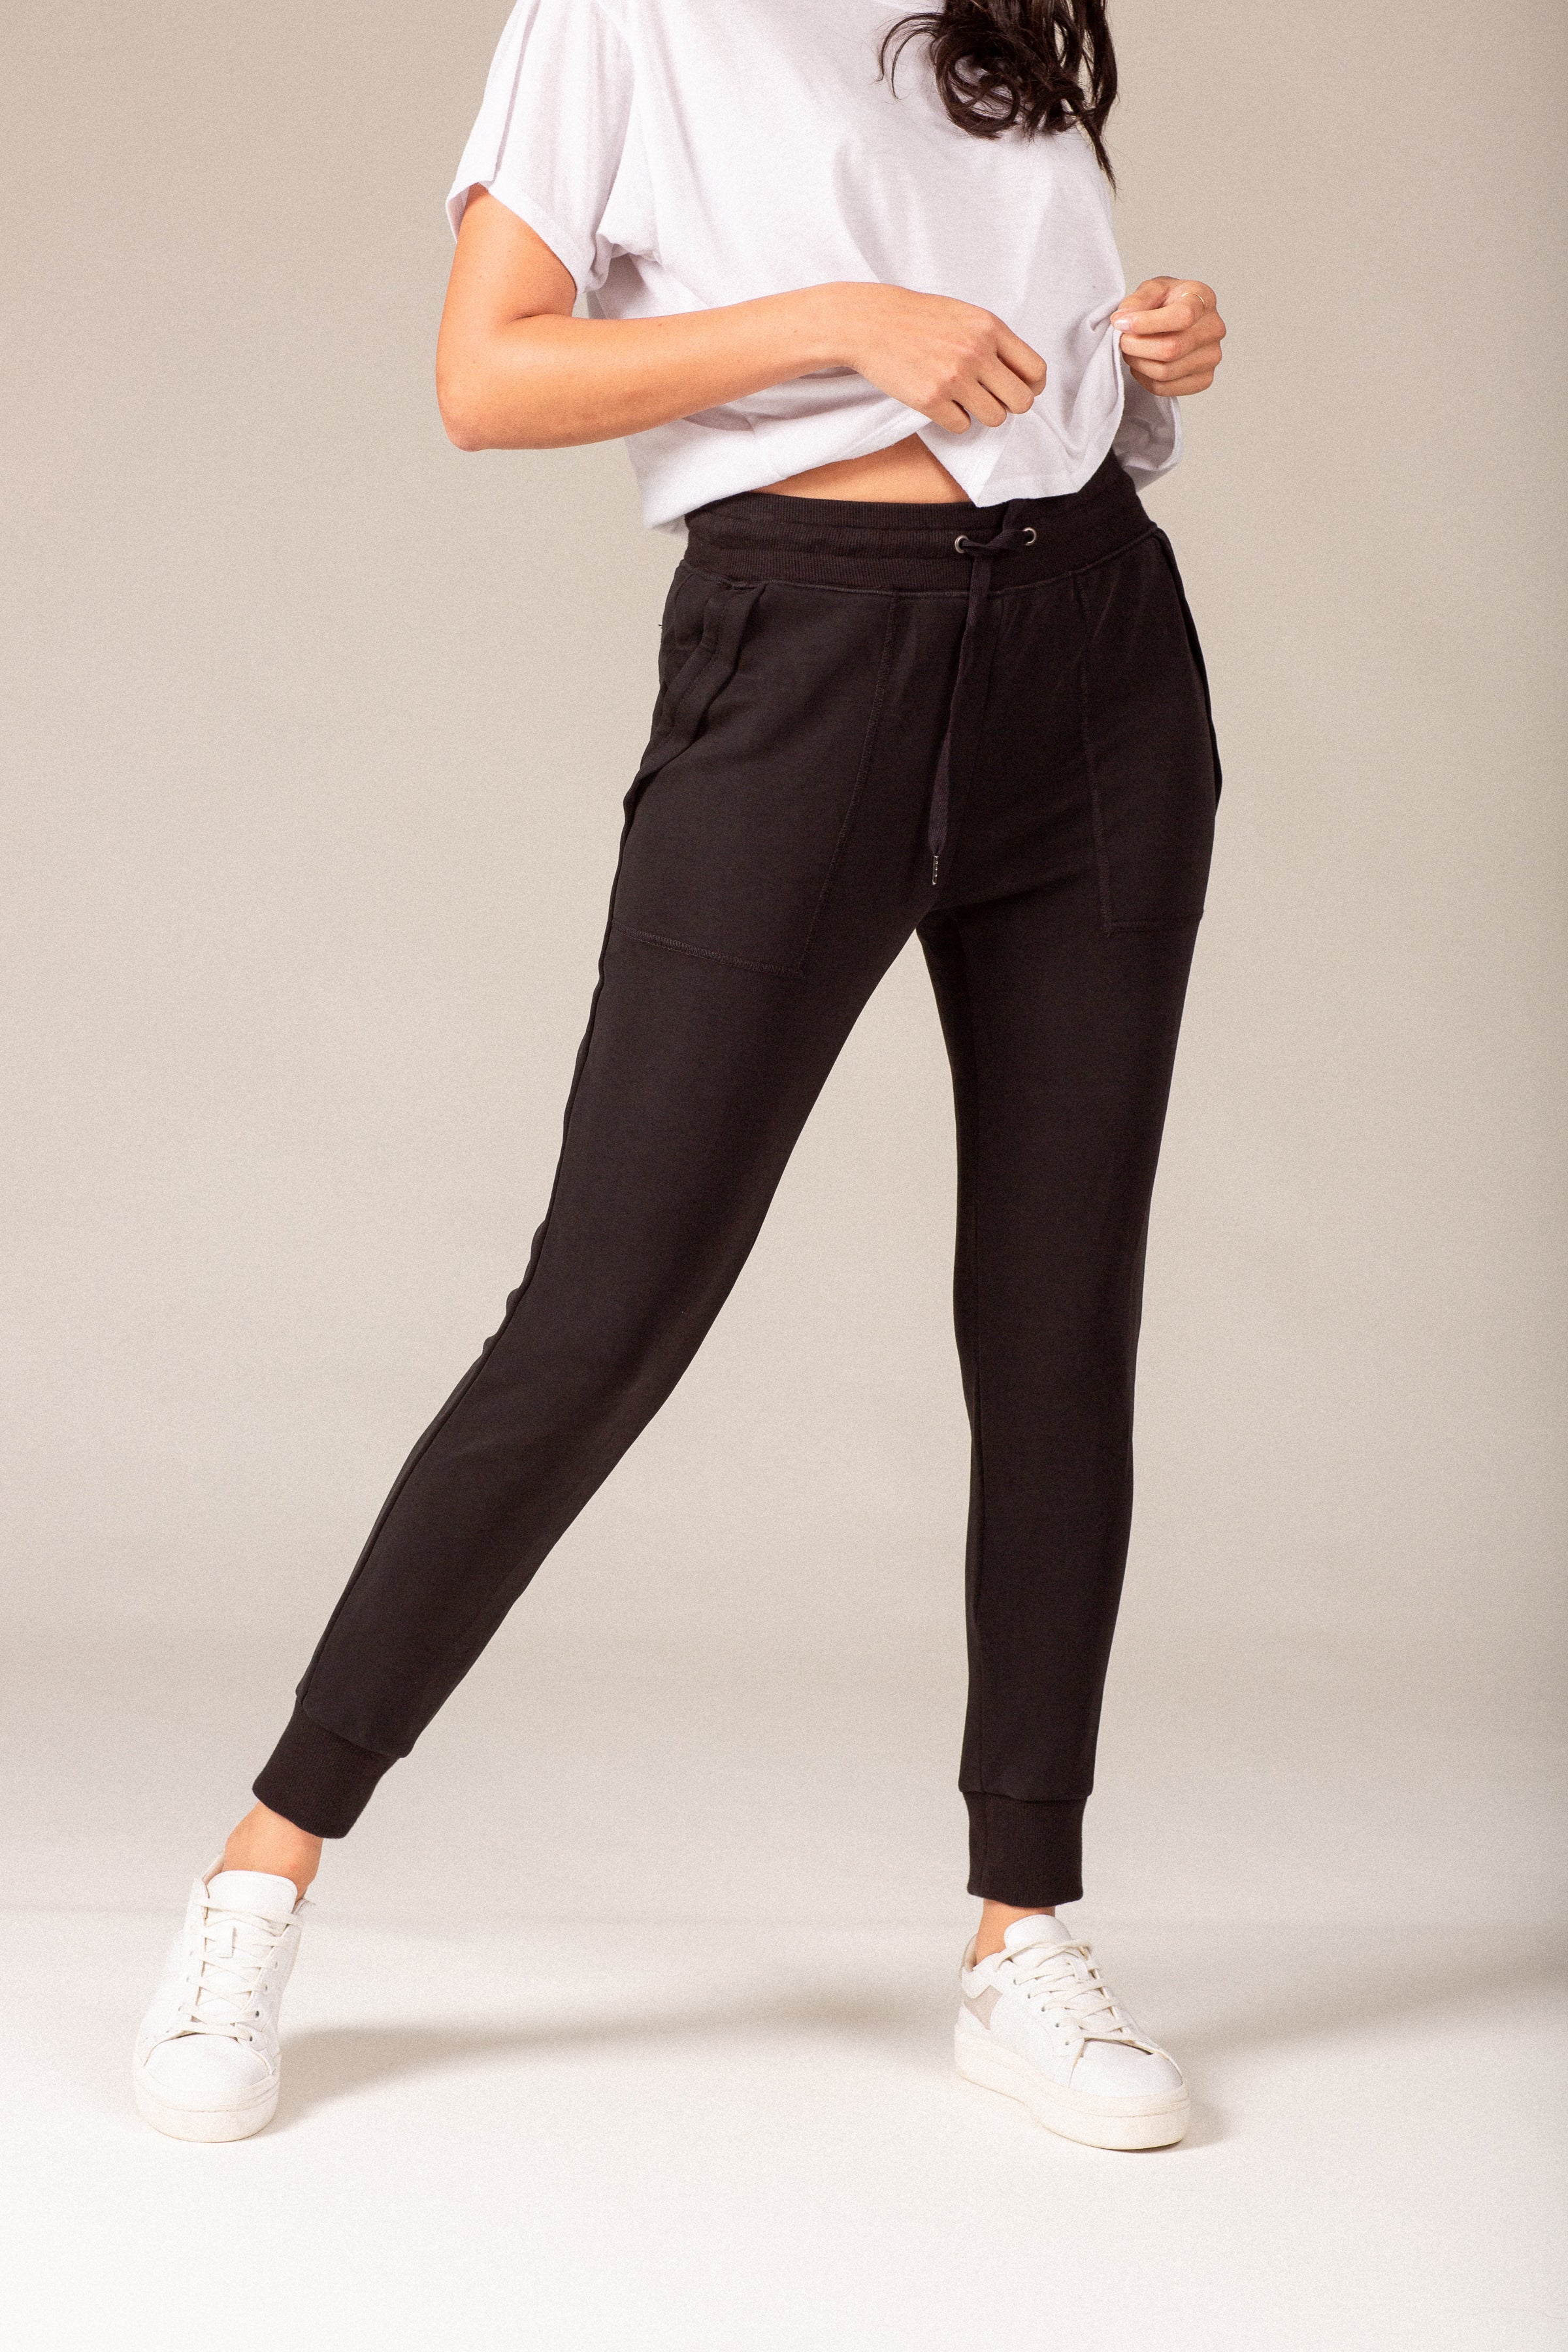 Gregory Modal Jogger Pant - Contemporary Modern Athleisure Pants